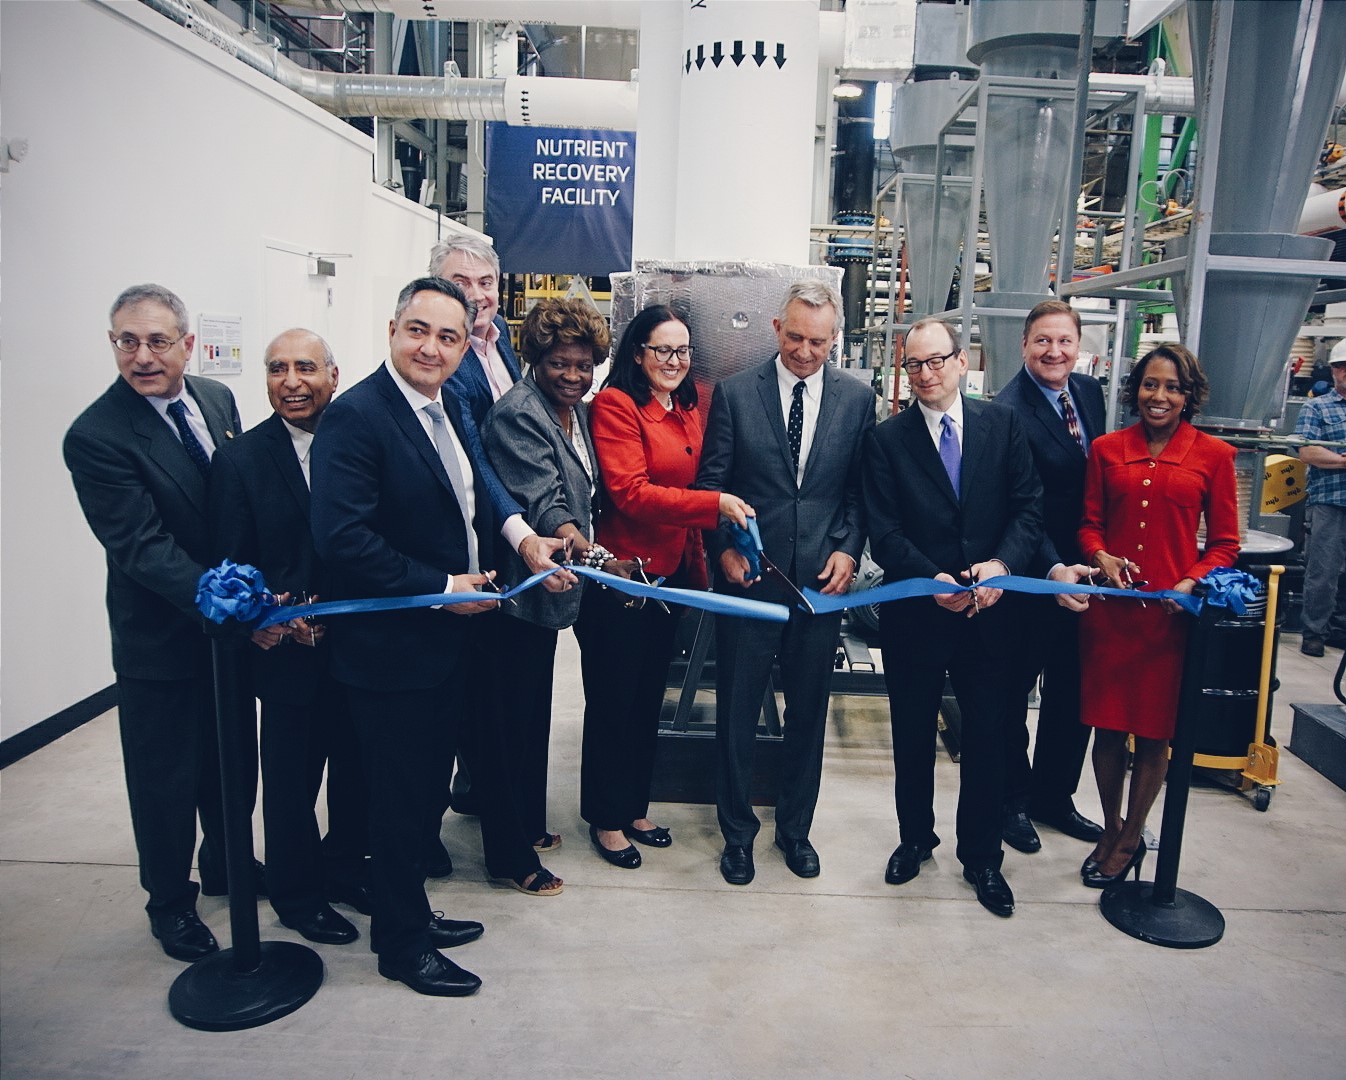 Metropolitan Water Reclamation District of Greater Chicago and Ostara Open World’s Largest Nutrient Recovery Facility